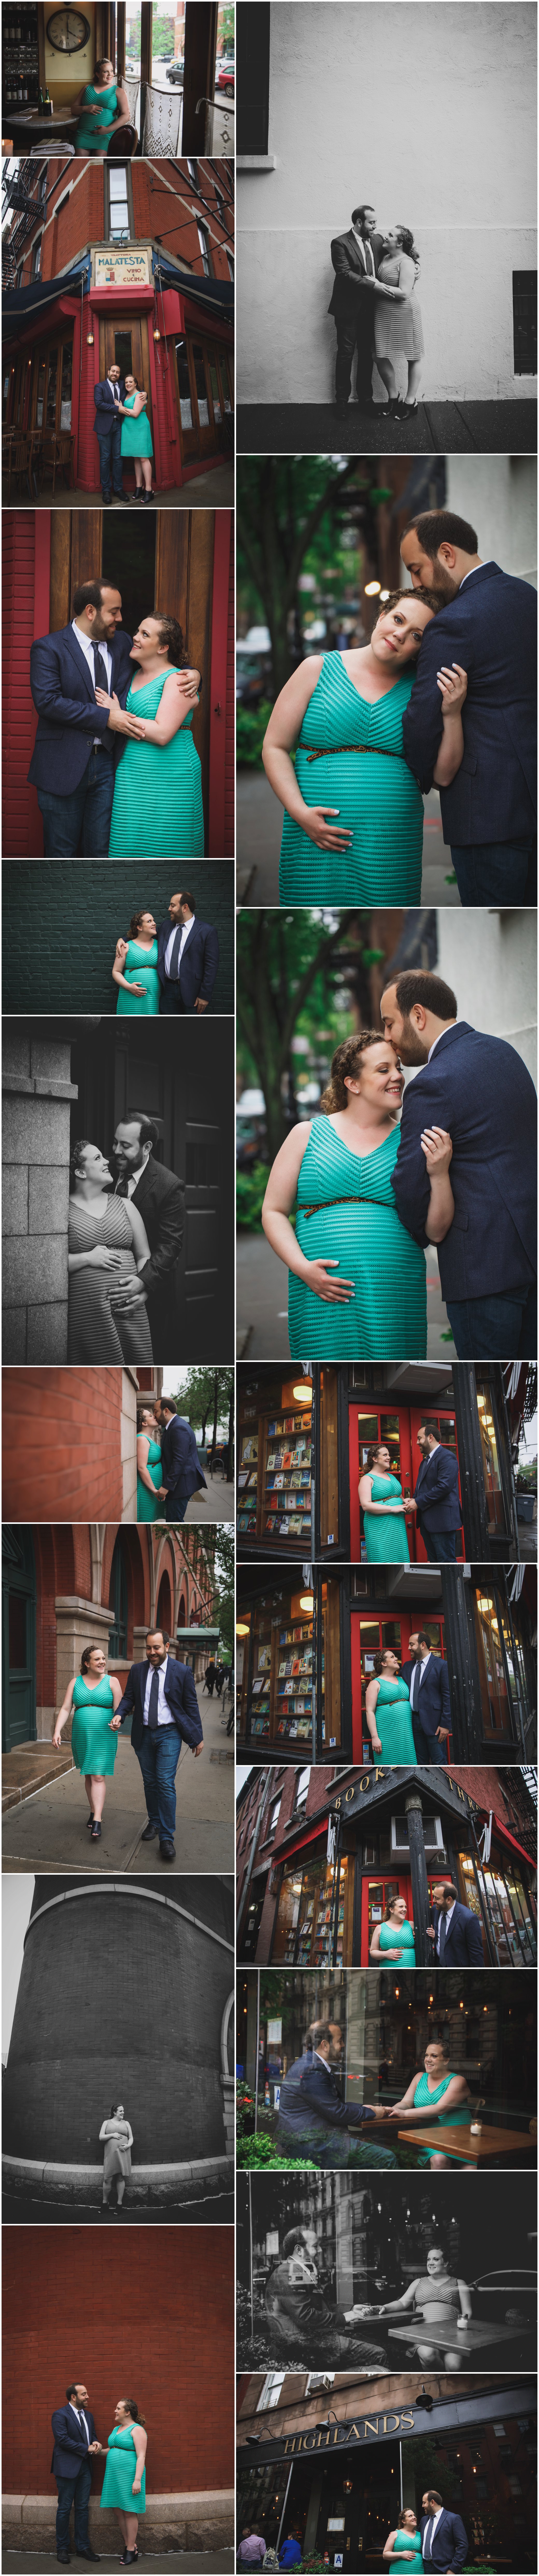 Maternity Session in New York City, by Katie Rain